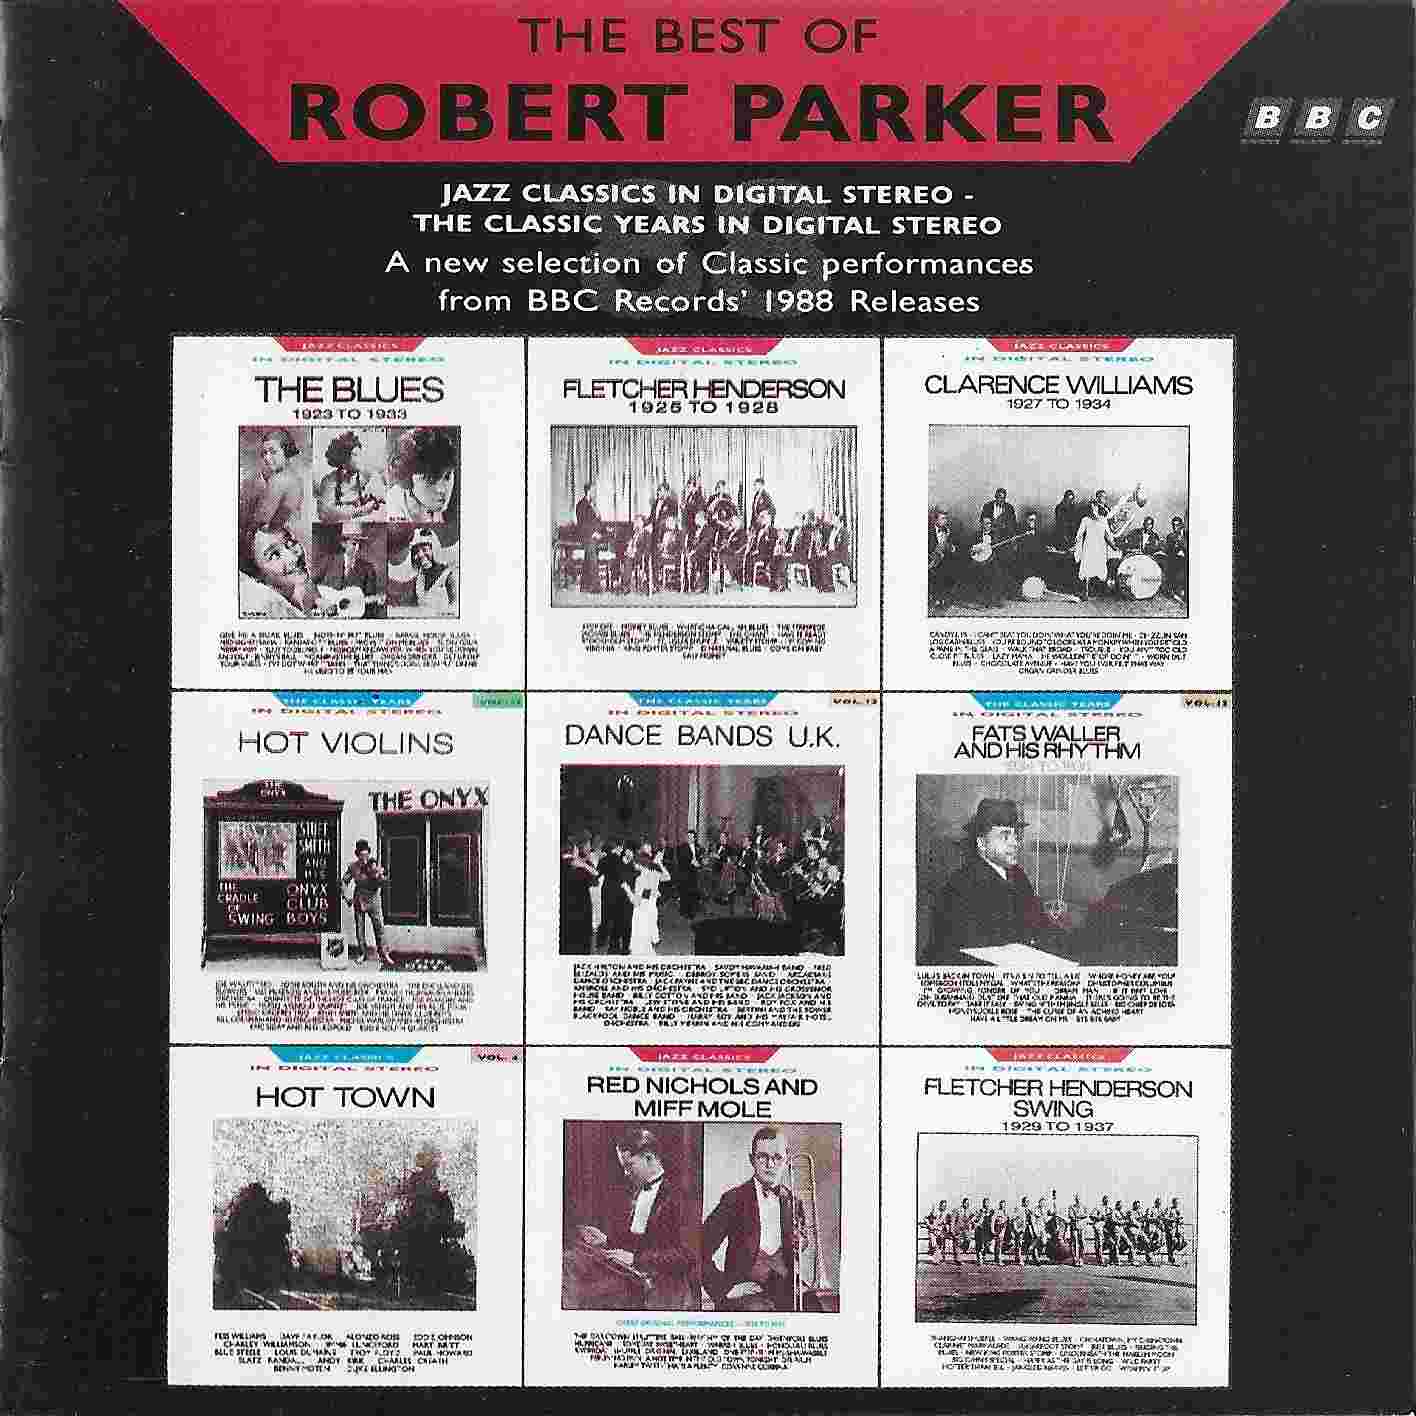 Picture of BBCCD725 The best of Robert Parker 1988 by artist Various from the BBC records and Tapes library